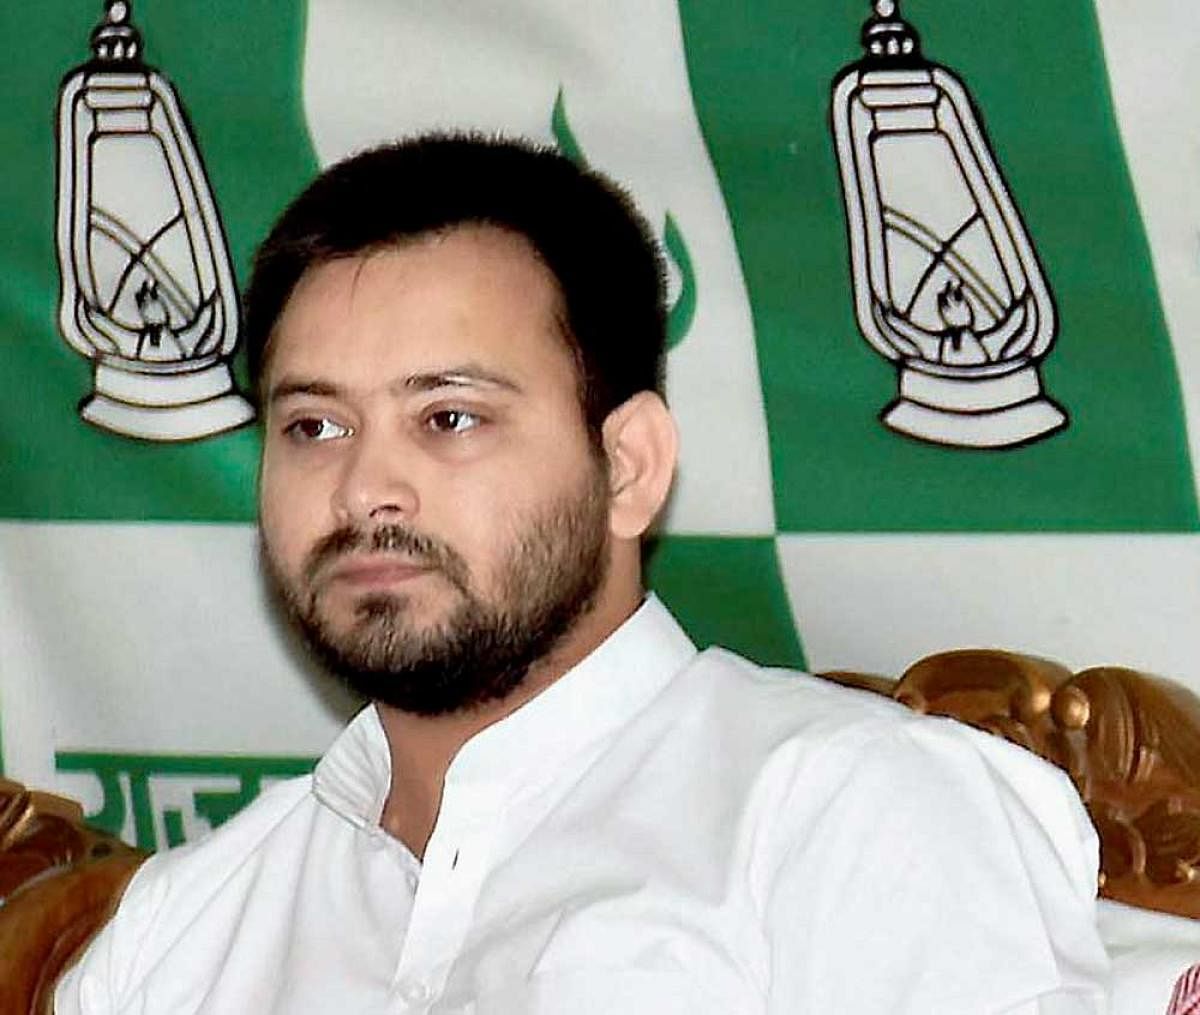 Tejashwi has been summoned for questioning on the 20th of November, while Rabri Devi has been summoned on the 24th. PTI file photo.